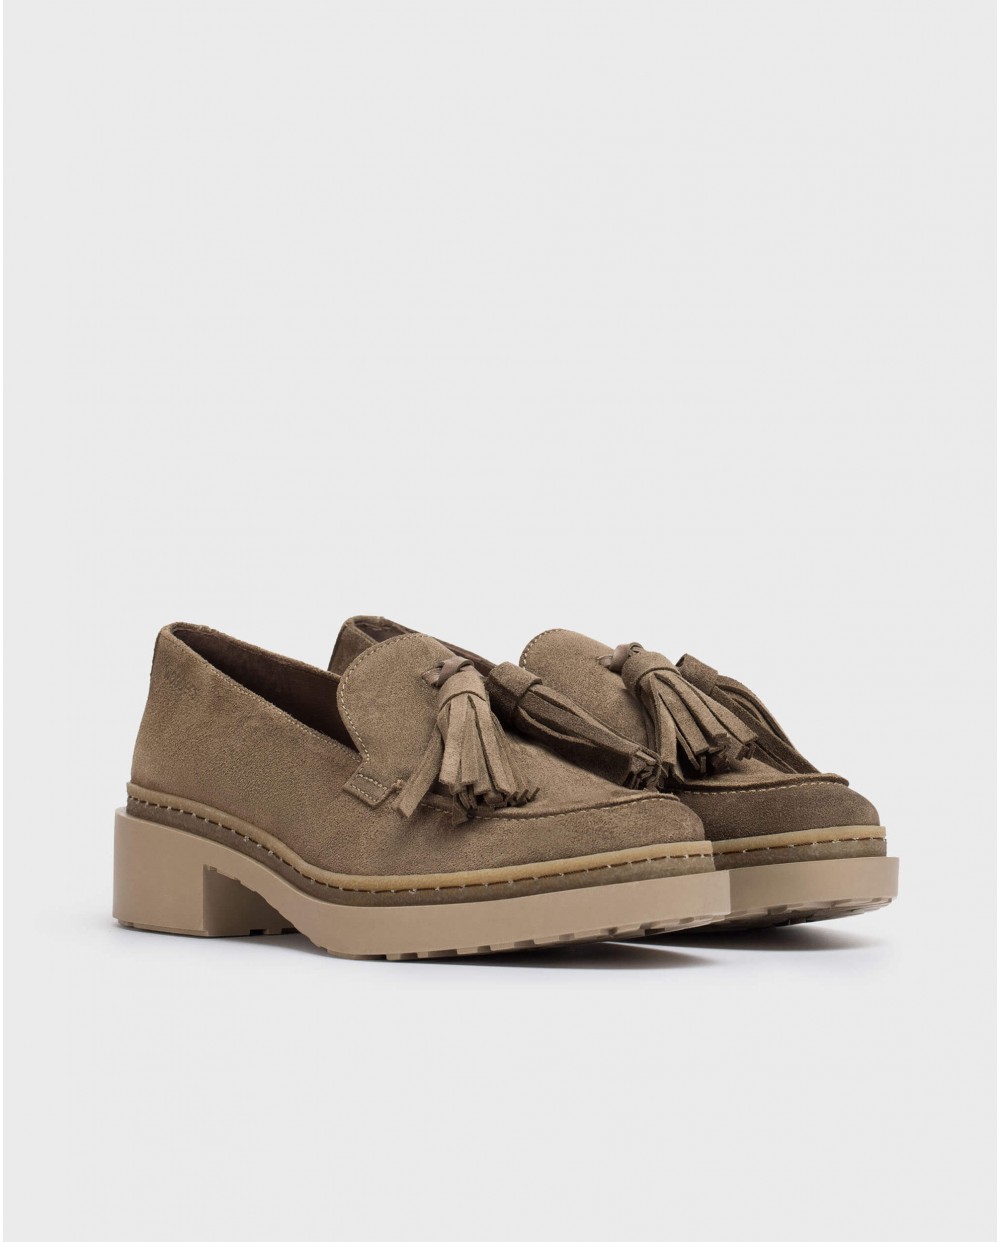 Wonders-Flat Shoes-Taupe Bea Moccasin